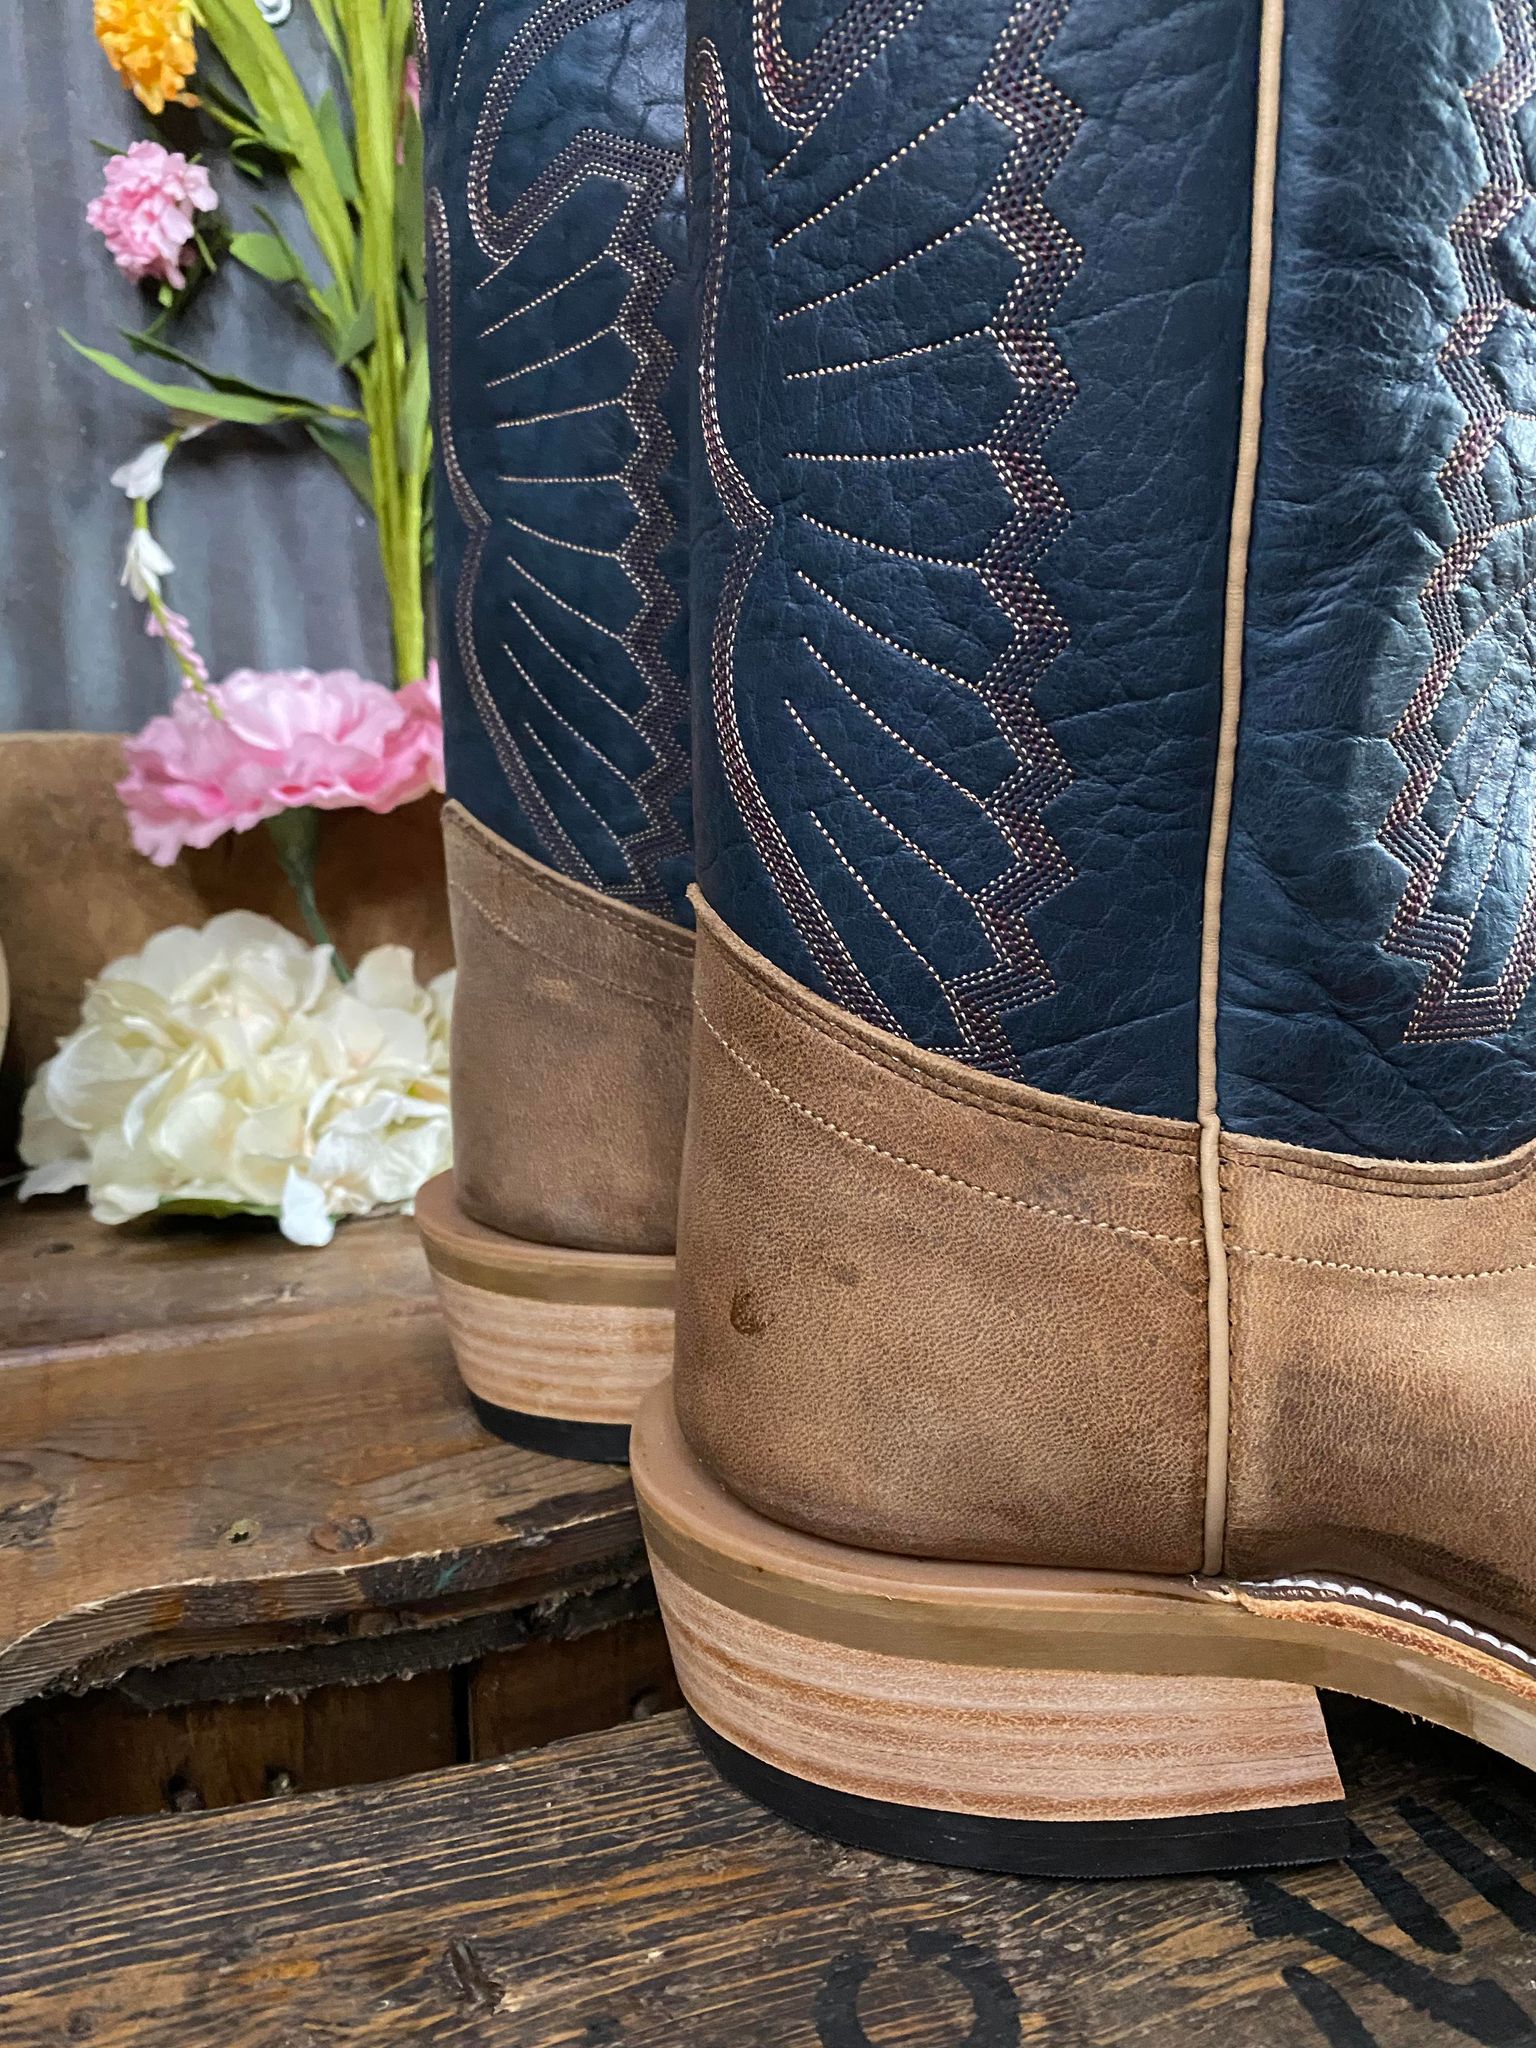 Men's Olathe Sand Angry Elk Tall Top Boots-Men's Boots-Anderson Bean-Lucky J Boots & More, Women's, Men's, & Kids Western Store Located in Carthage, MO